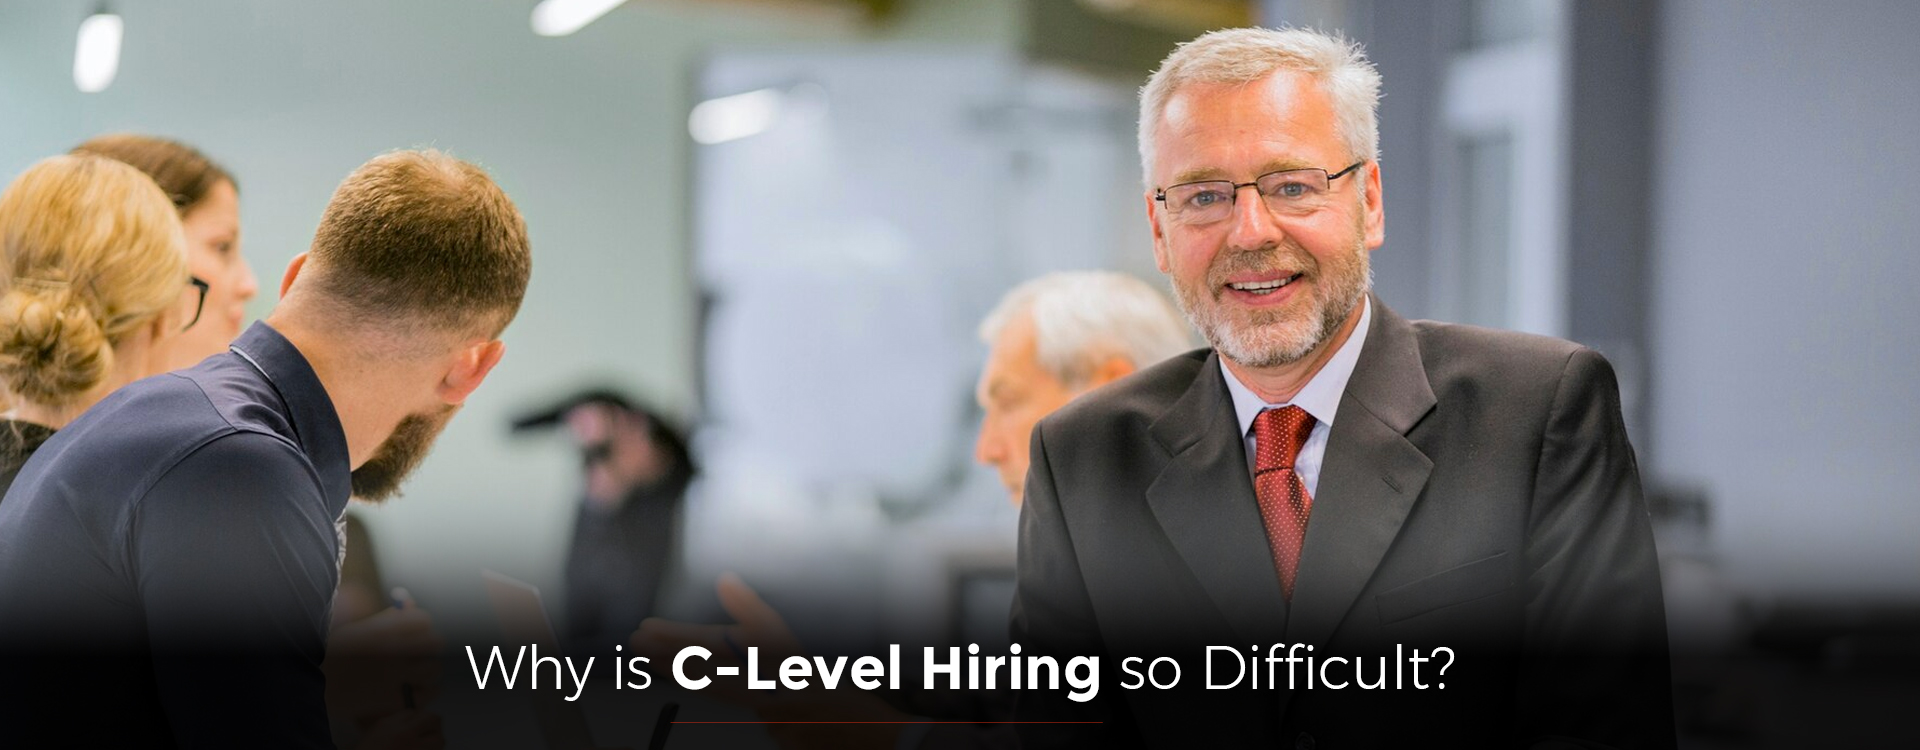 Why is C-Level Hiring so Difficult